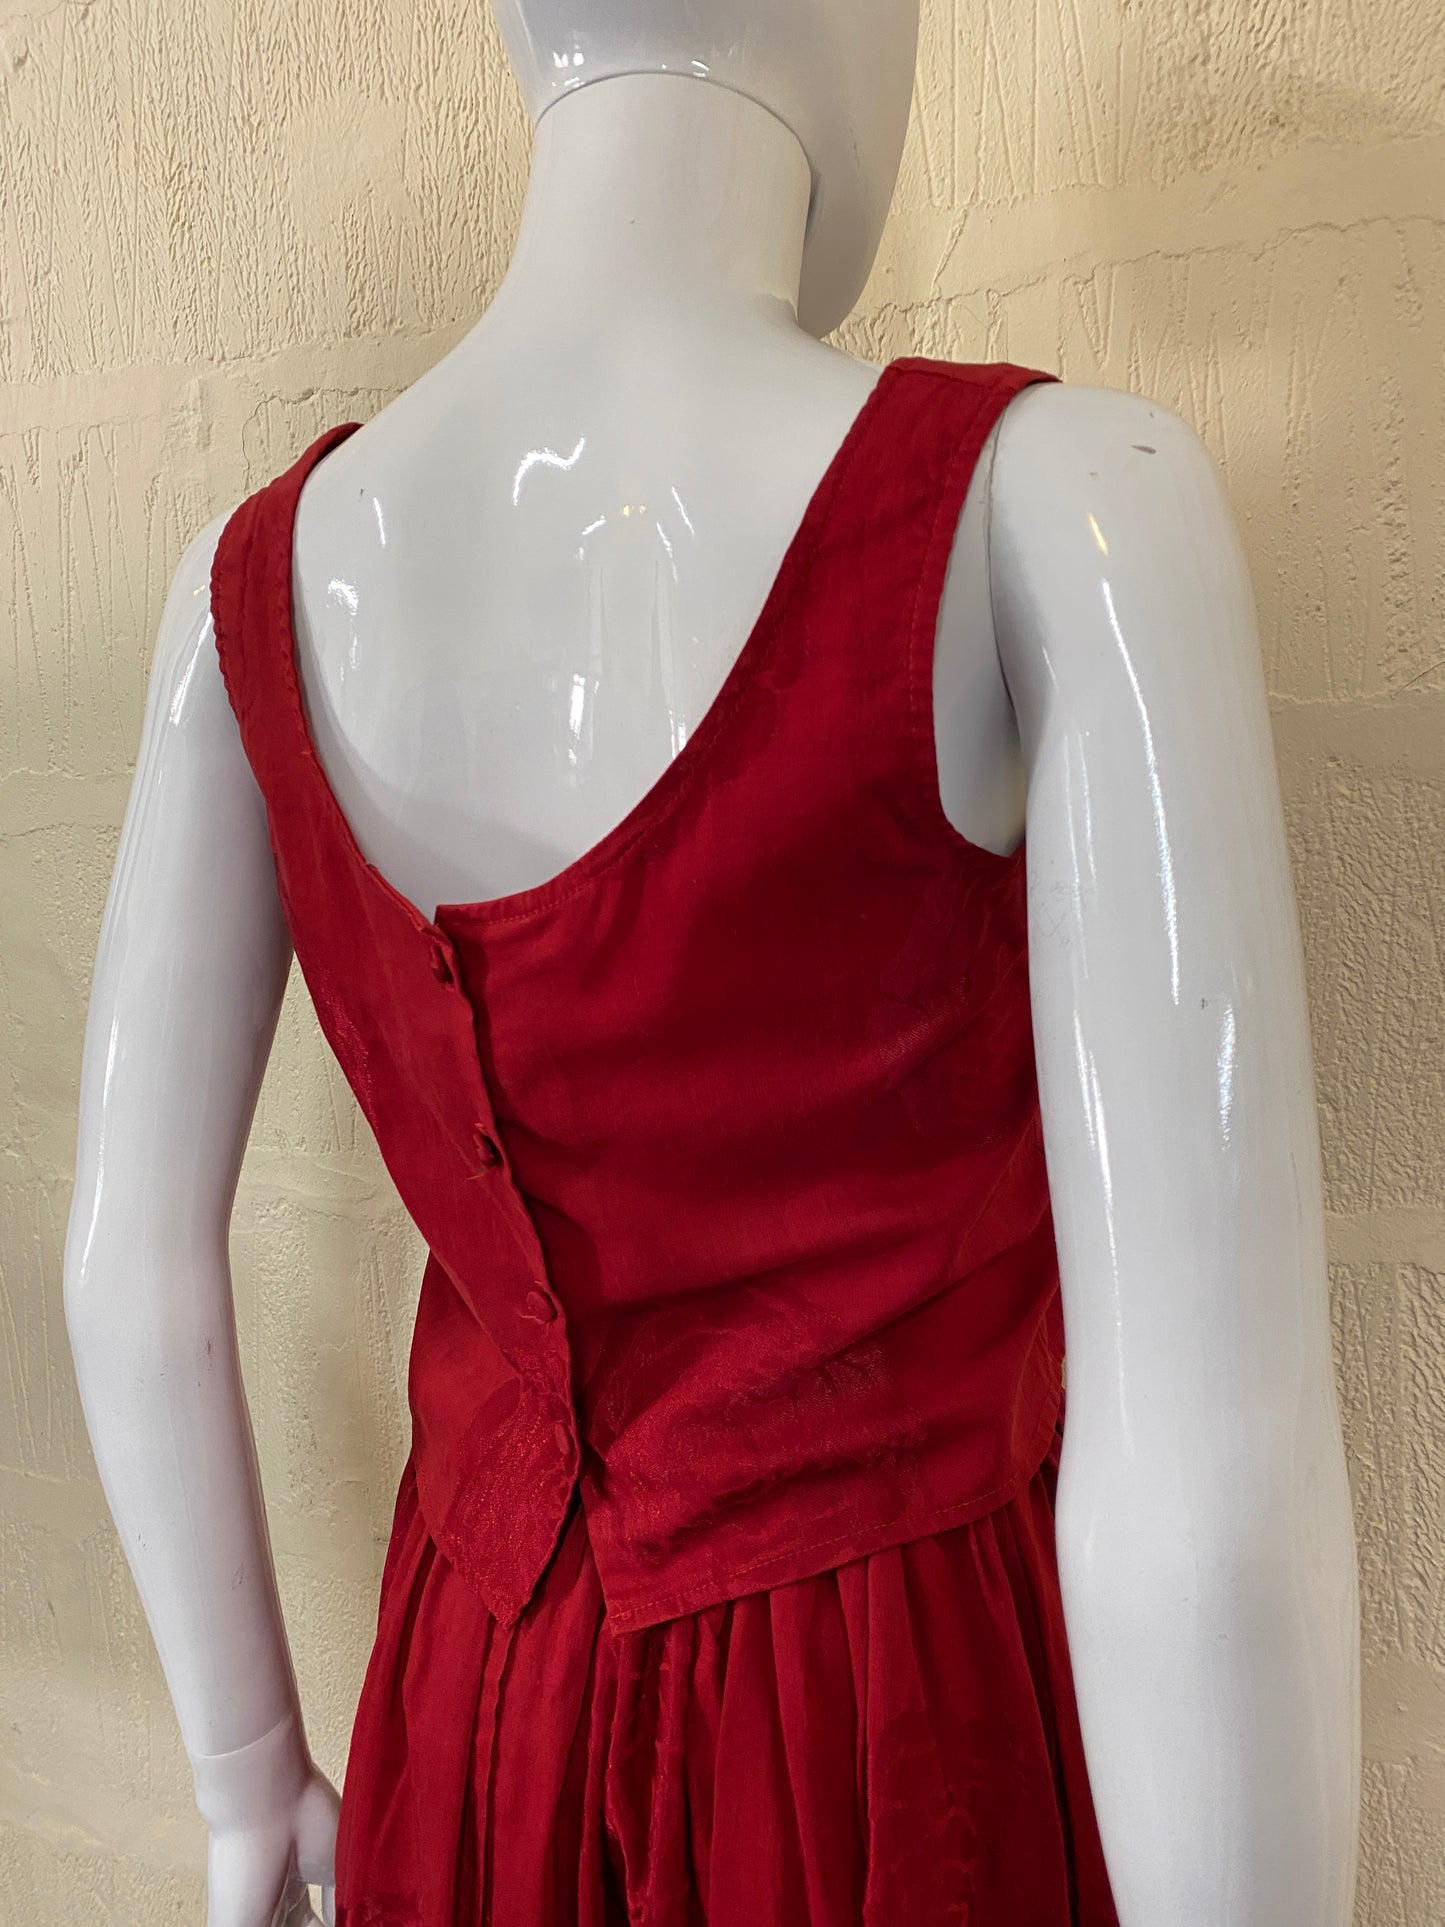 Vintage Red Bodice Top Size 8